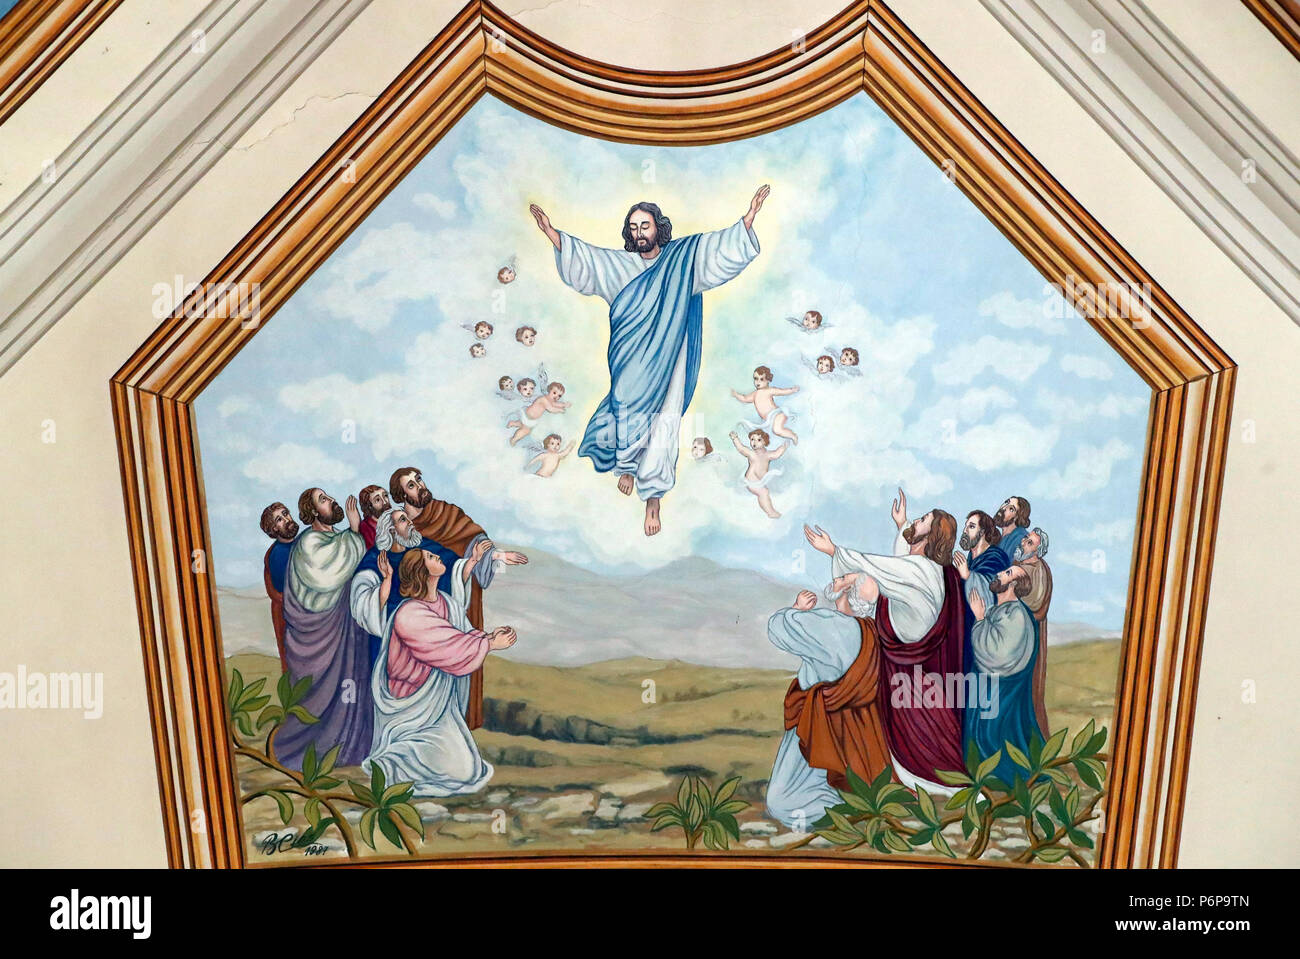 Saint Andre Church The Ascension Of Jesus Wall Painting Stock Photo Alamy